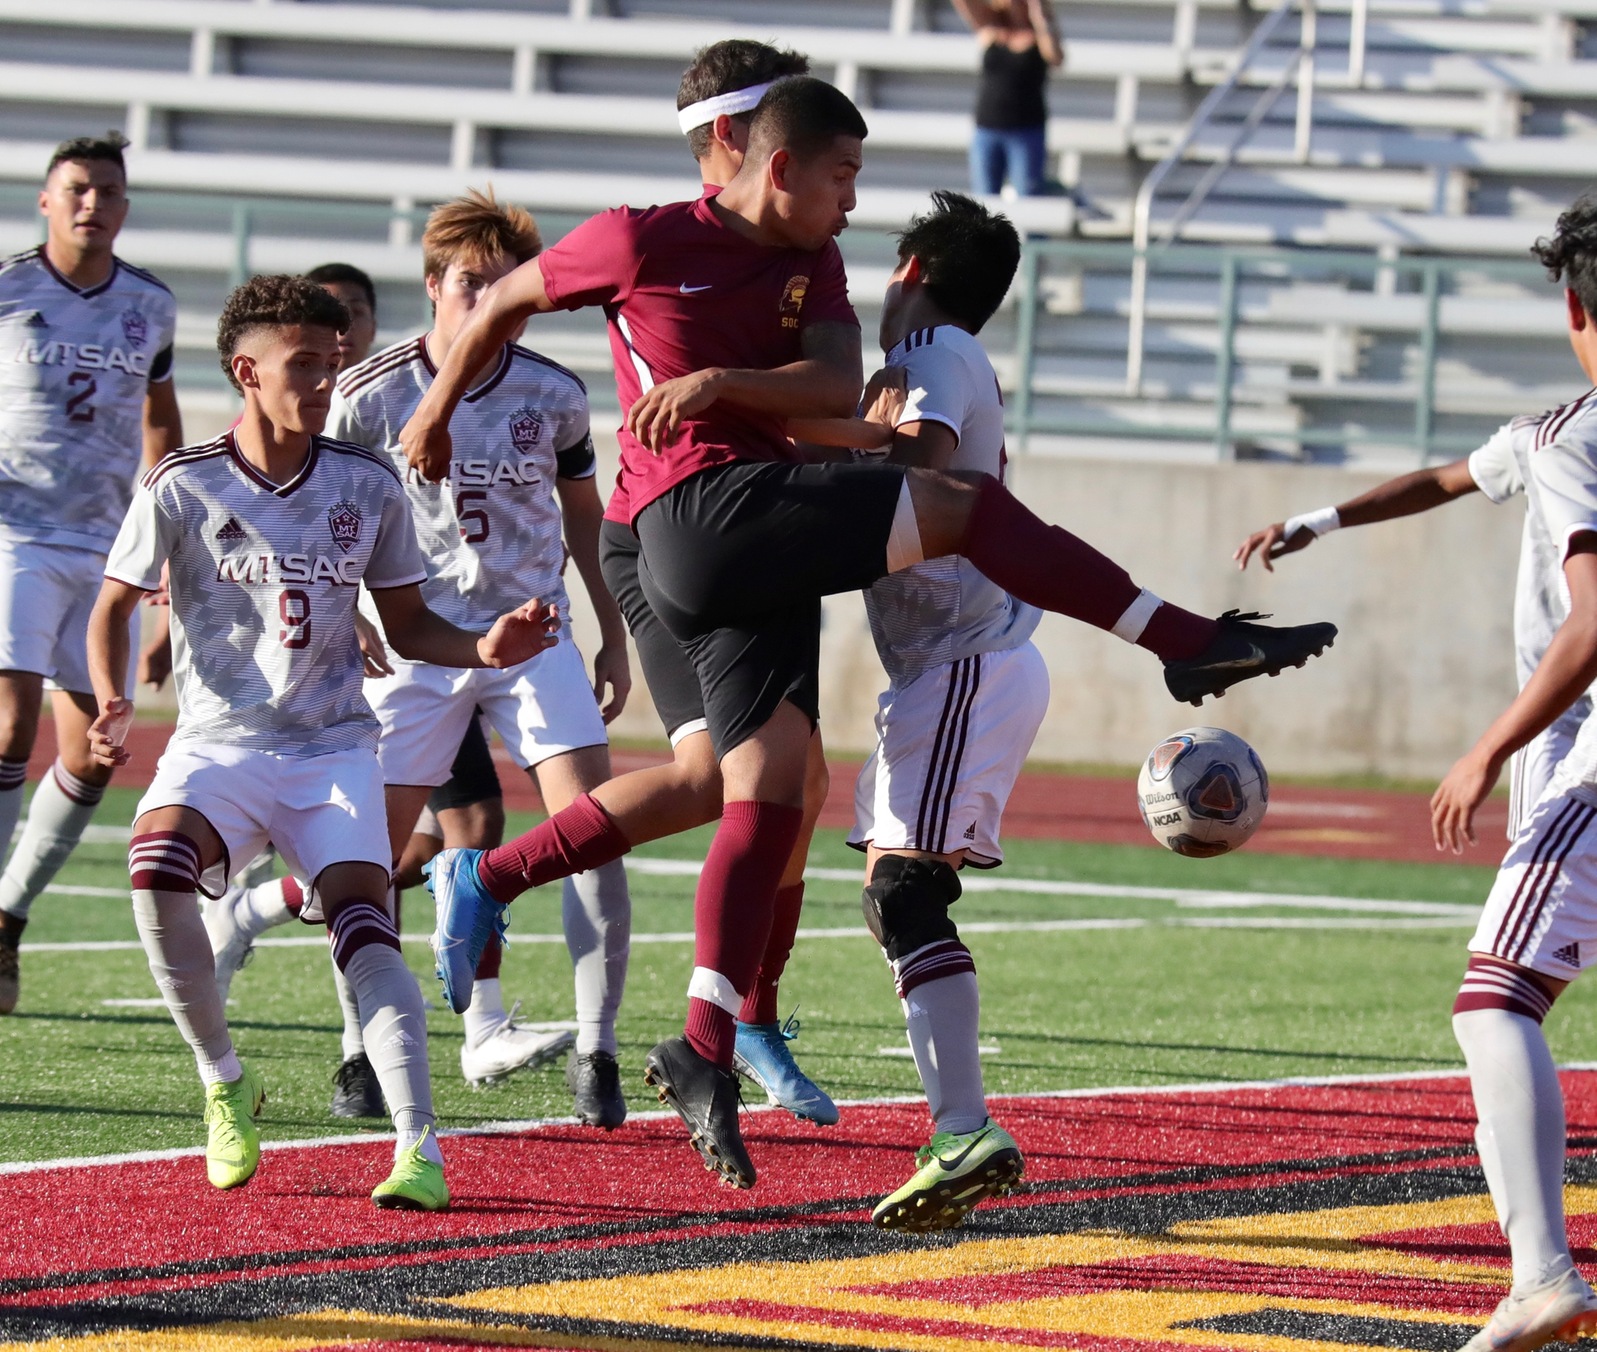 Andres Velasquez, in action in a recent match, scored 2 goals in today's win, photo by Michael Watkins.